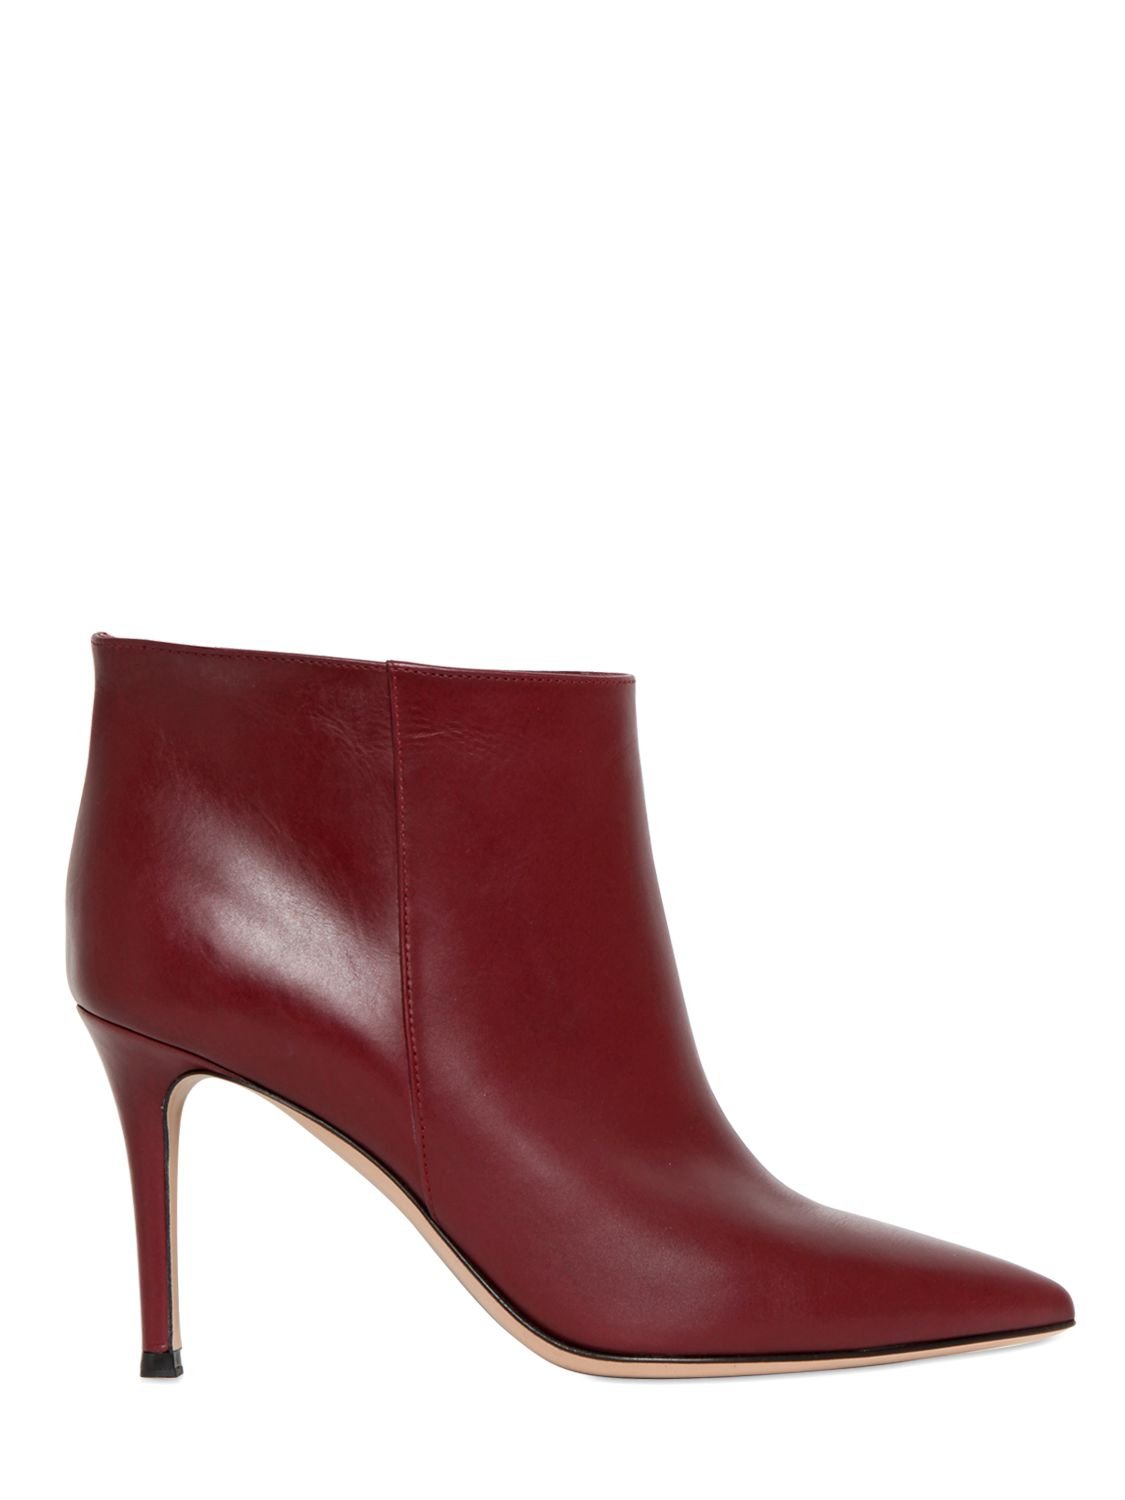 Lyst - Gianvito rossi 85Mm Leather Ankle Boots in Red